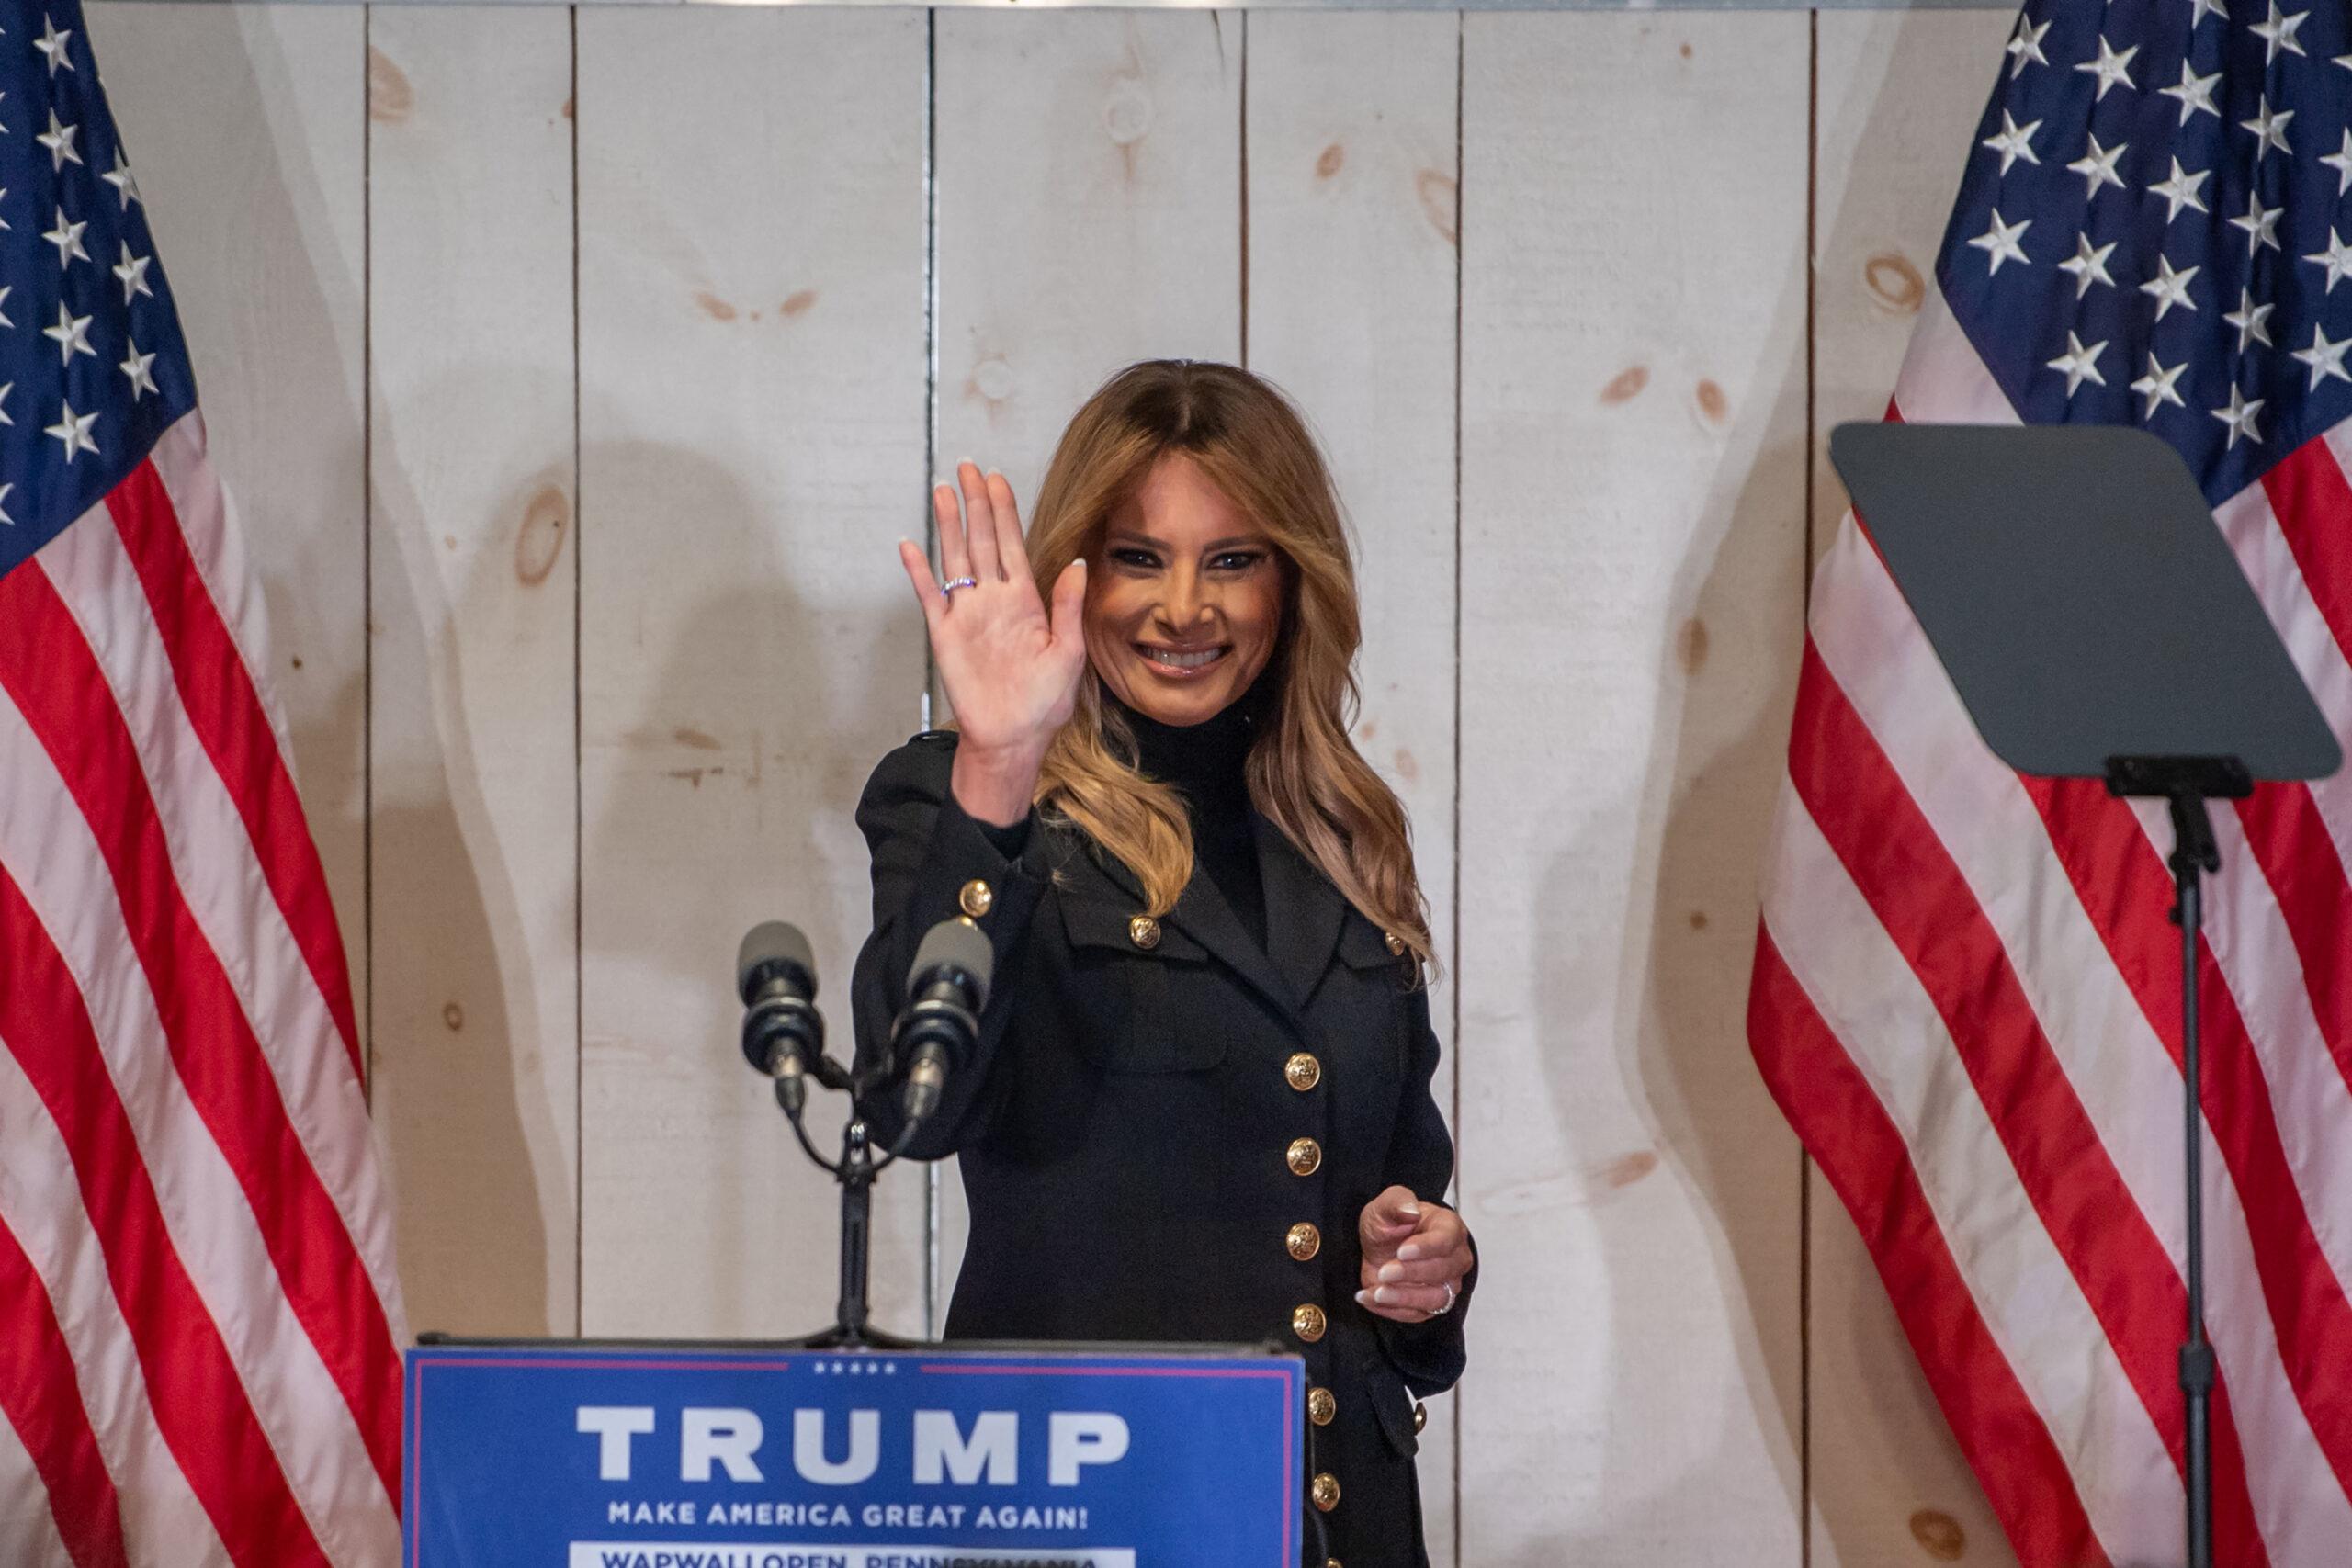 How Melania Trump's Testimony In Hush Money Trial Could Be 'Powerful' Support For Her Husband